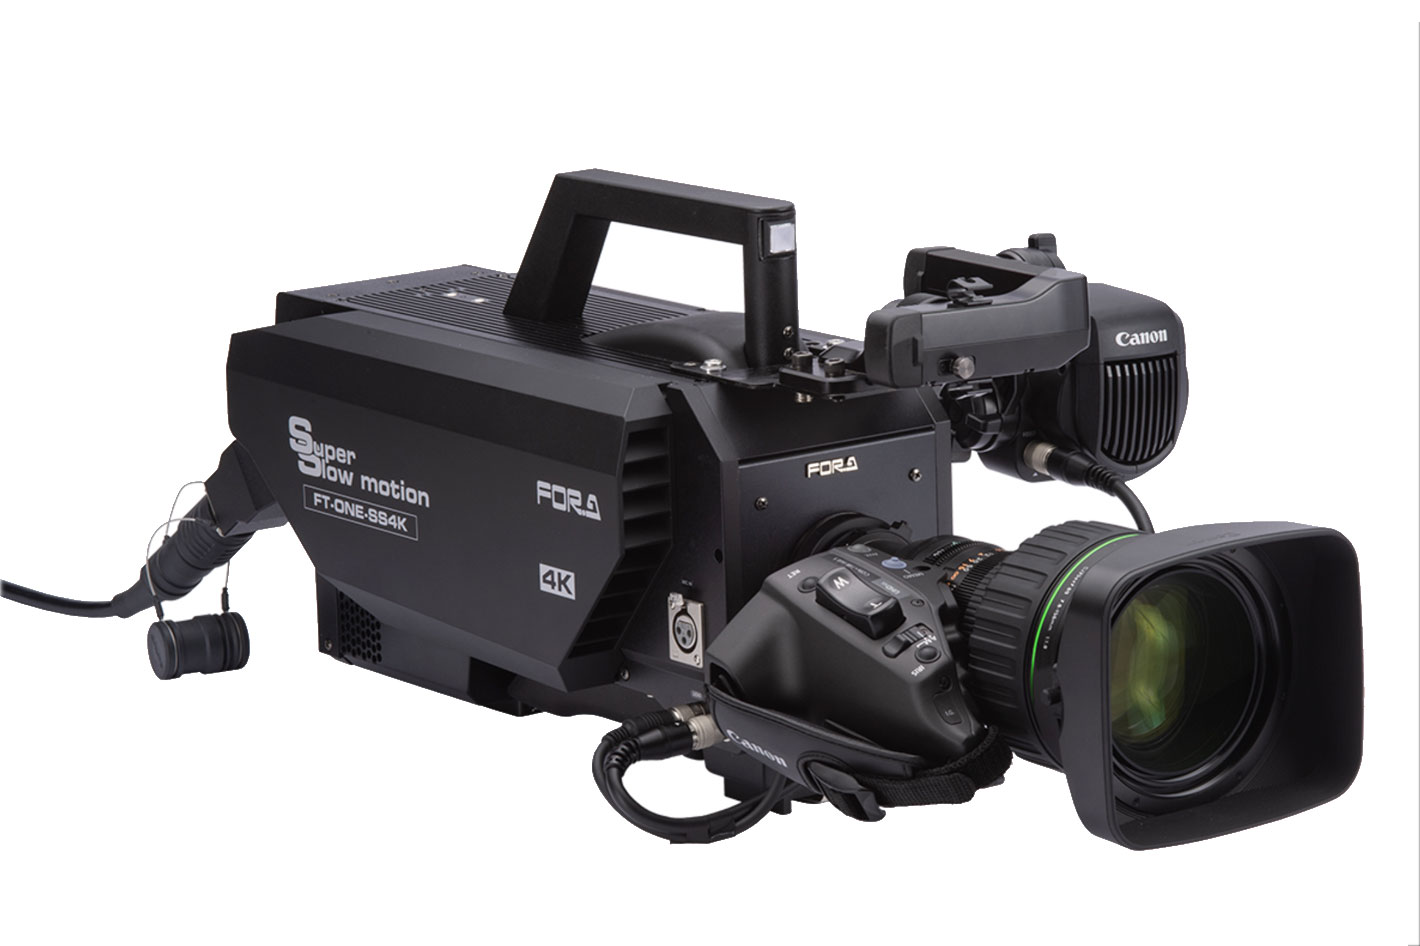 pause touch overlook FT-ONE-SS4K: ultra-high-speed camera reaches 1000fps by Jose Antunes -  ProVideo Coalition